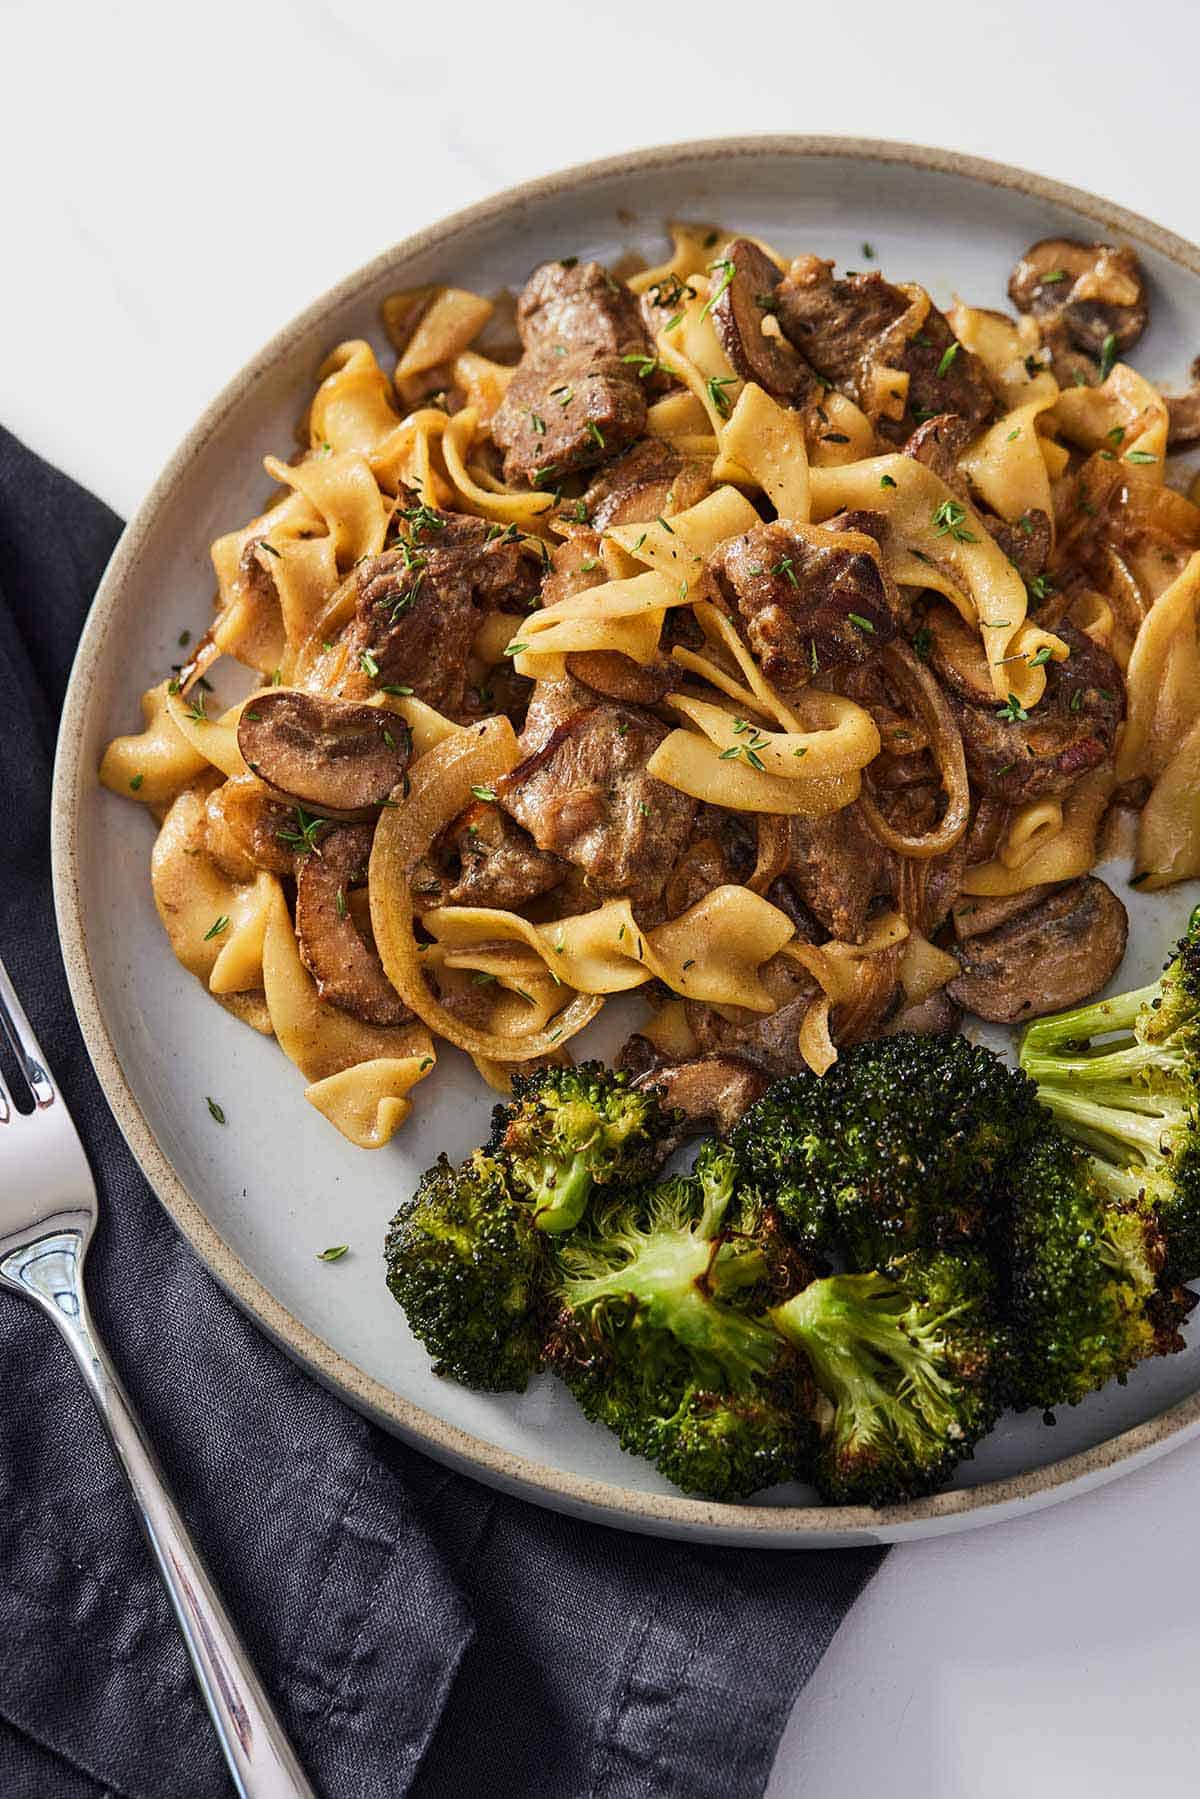 A plate of beef stroganoff with broccoli.